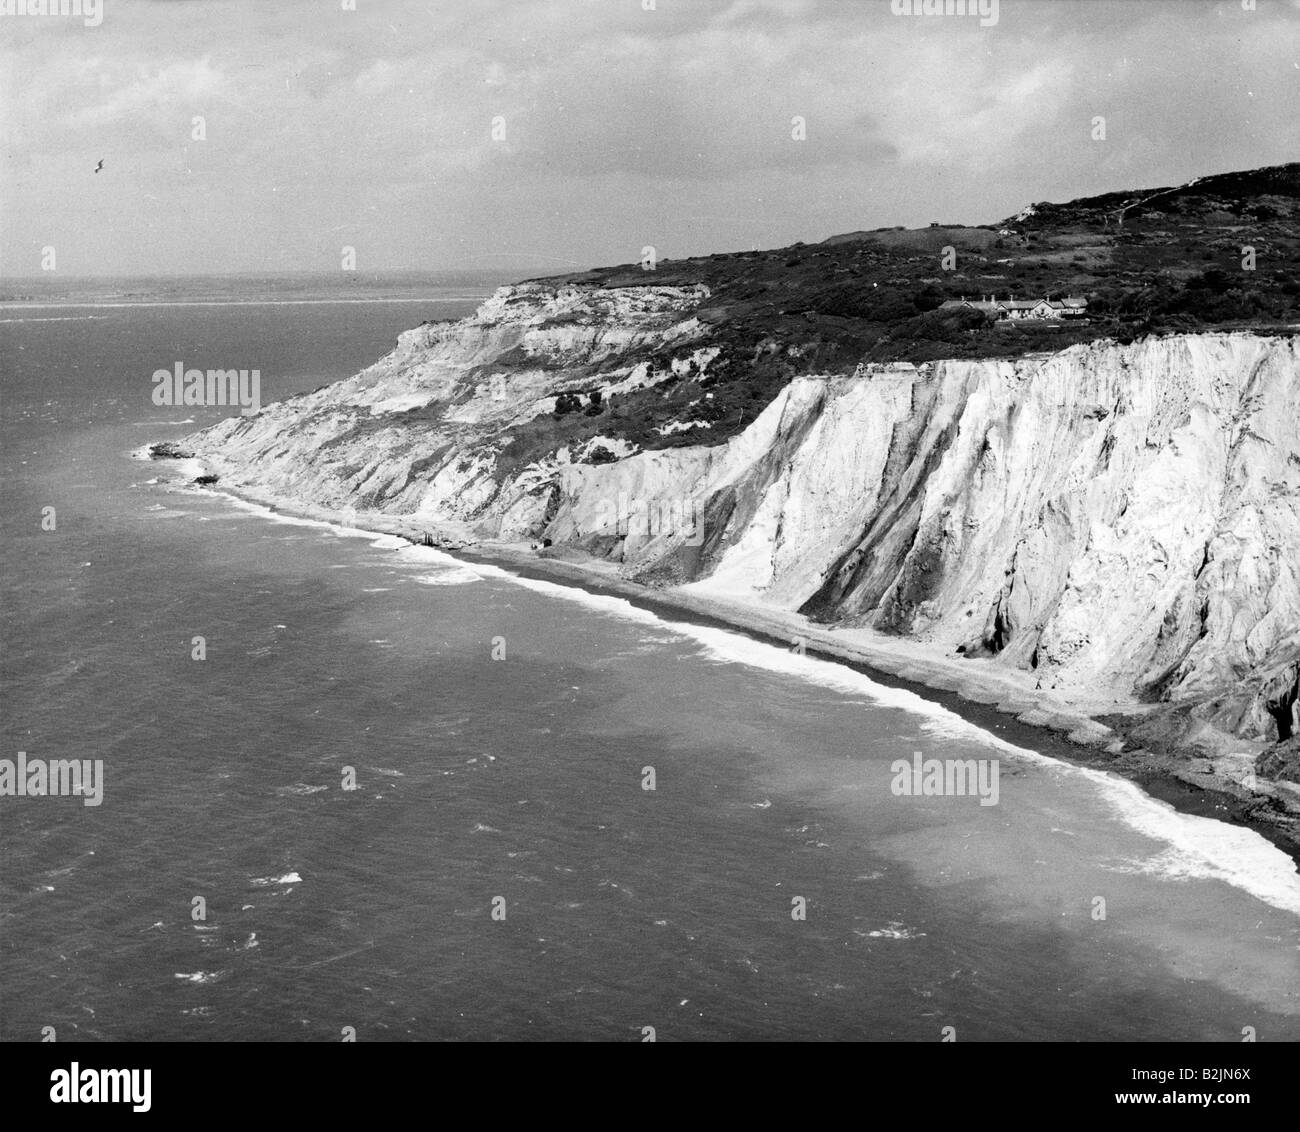 geography / travel, Great Britain, England, Isle of Wight, landscape / landscapes, Alum Bay, sandstone rocks, 1950s, Stock Photo